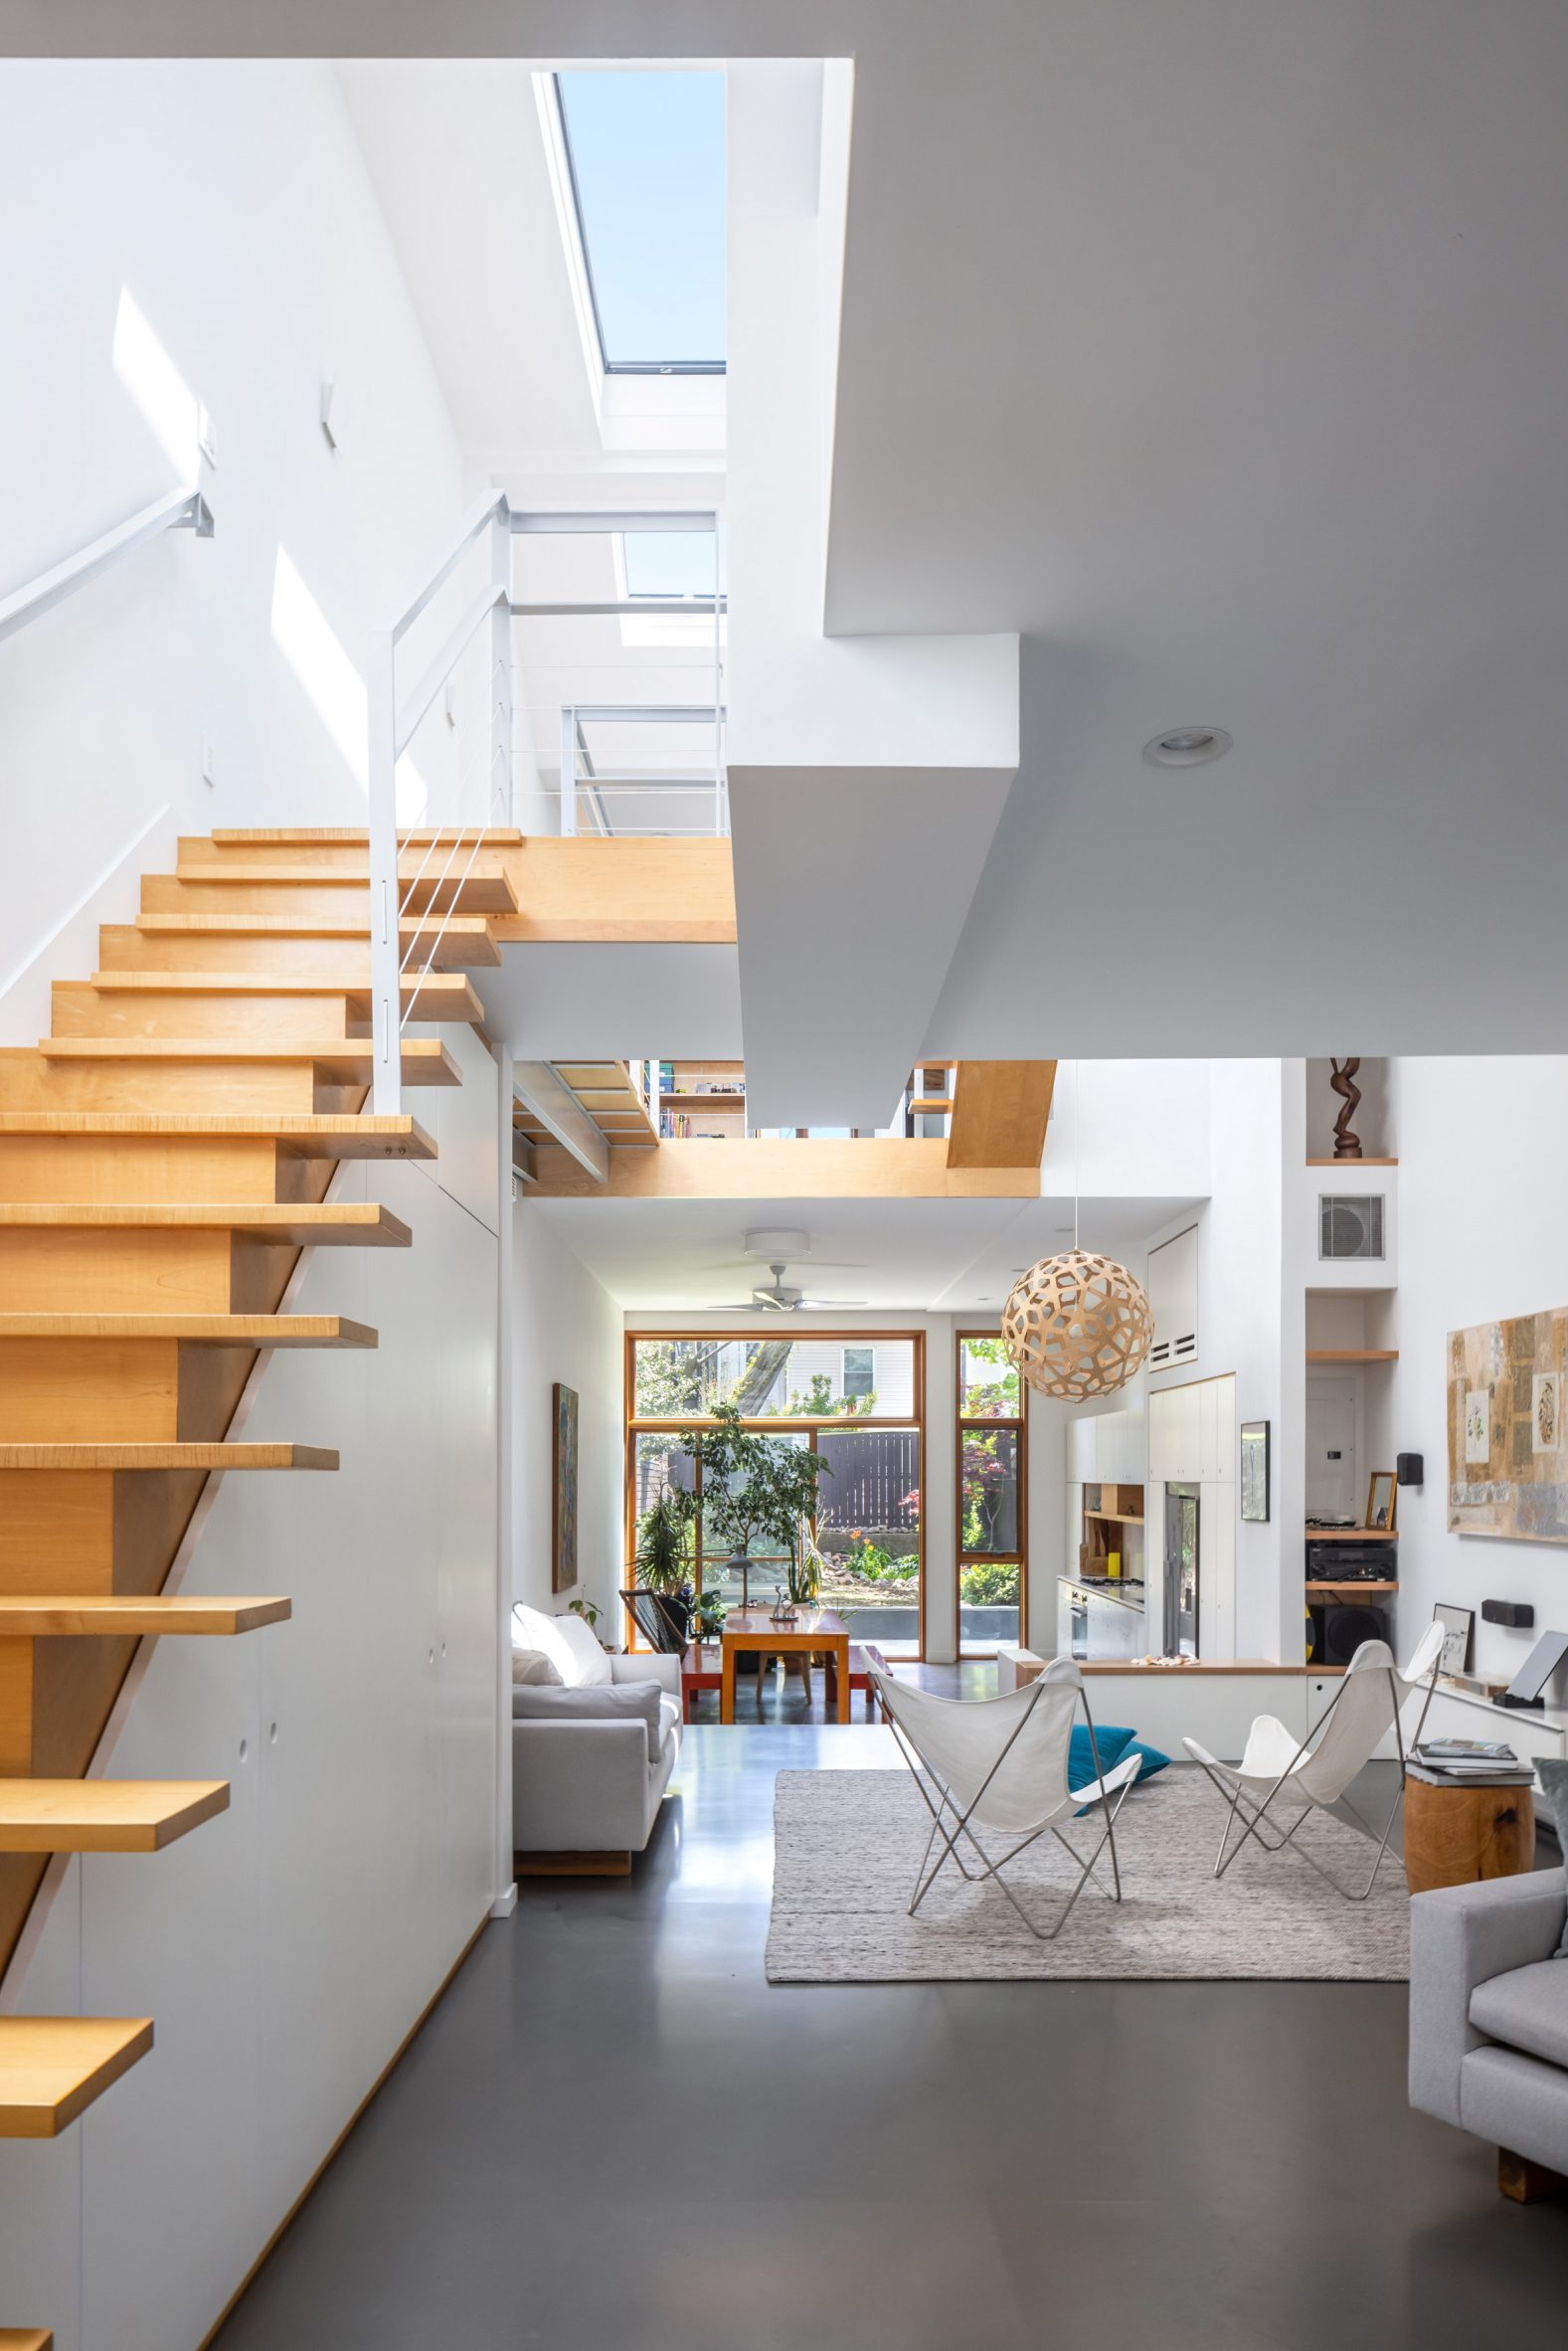 Maple staircase in white townhouse interior by Fanny and Matthew Mueller